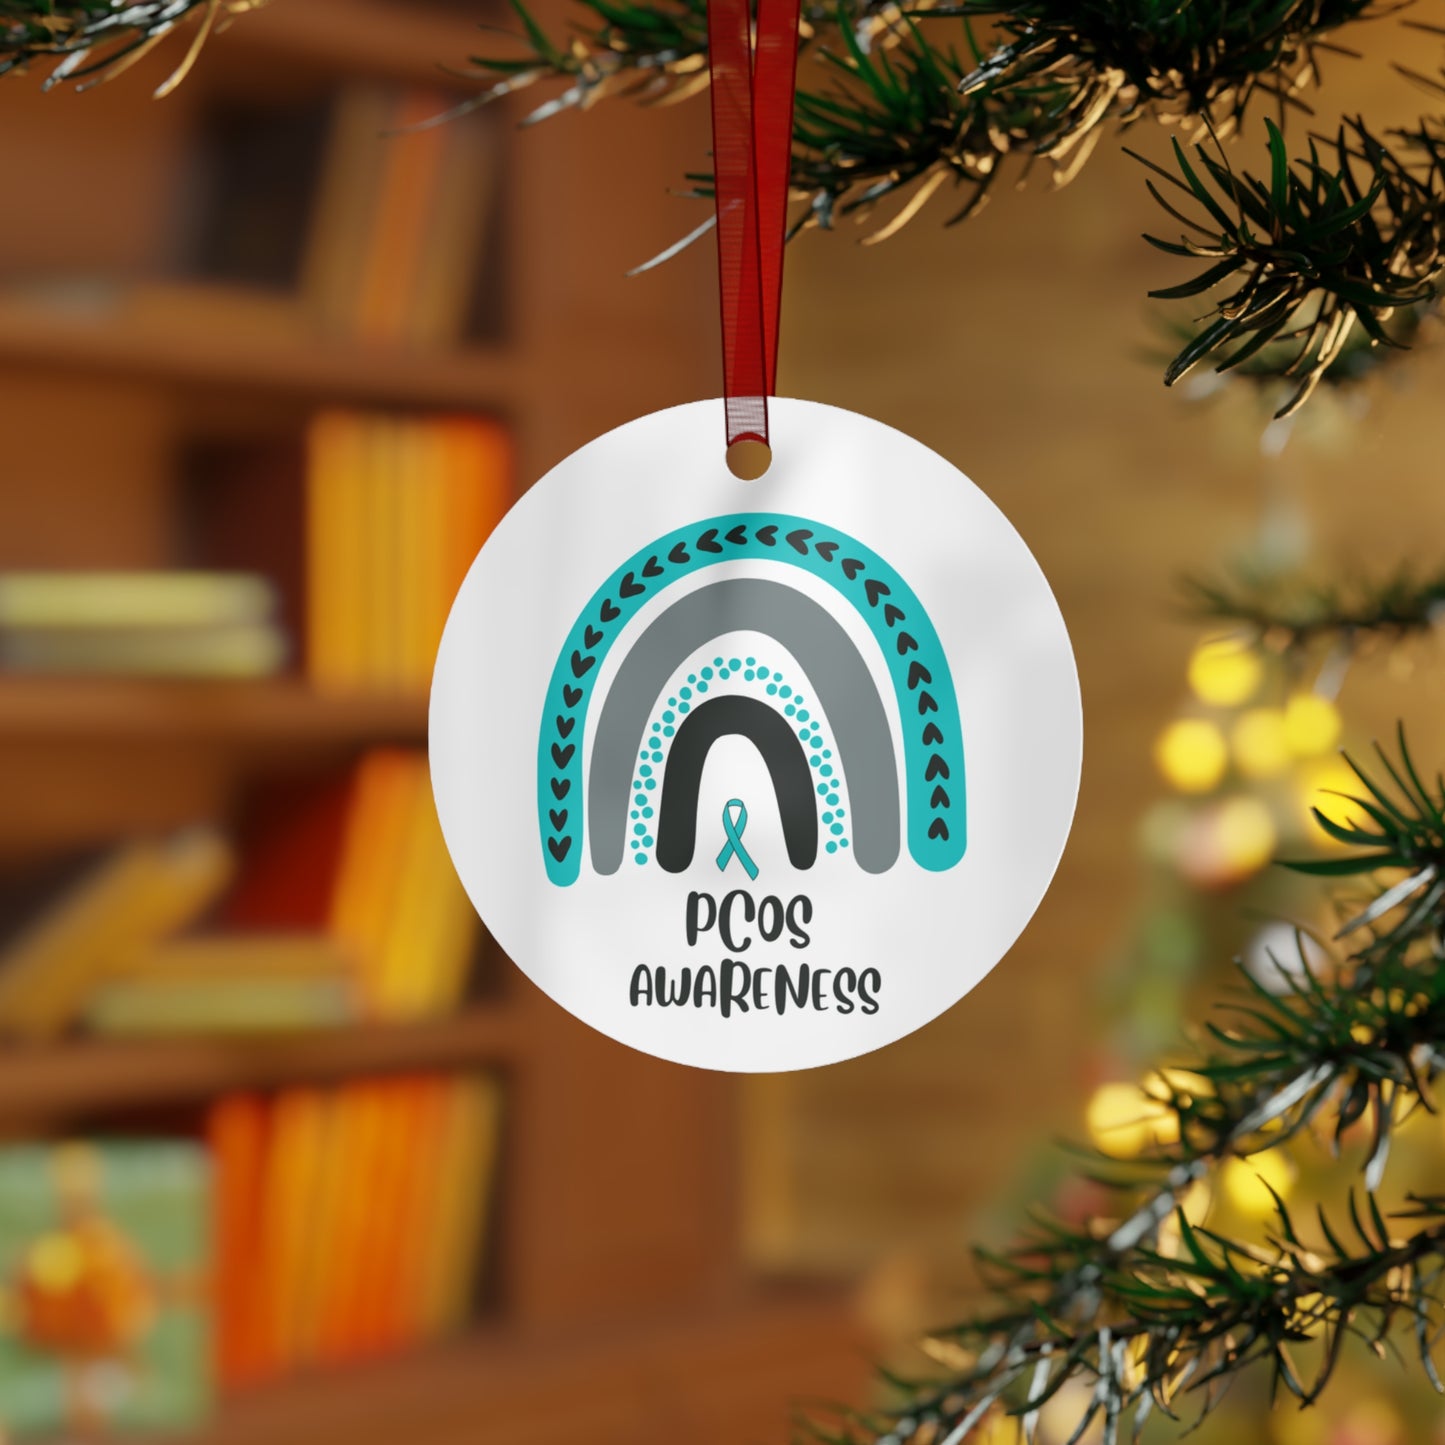 PCOS Awareness Christmas Ornament Stocking Stuffer Christmas Gift, Holiday Home Decor, Wall Hanging, Support for Friend